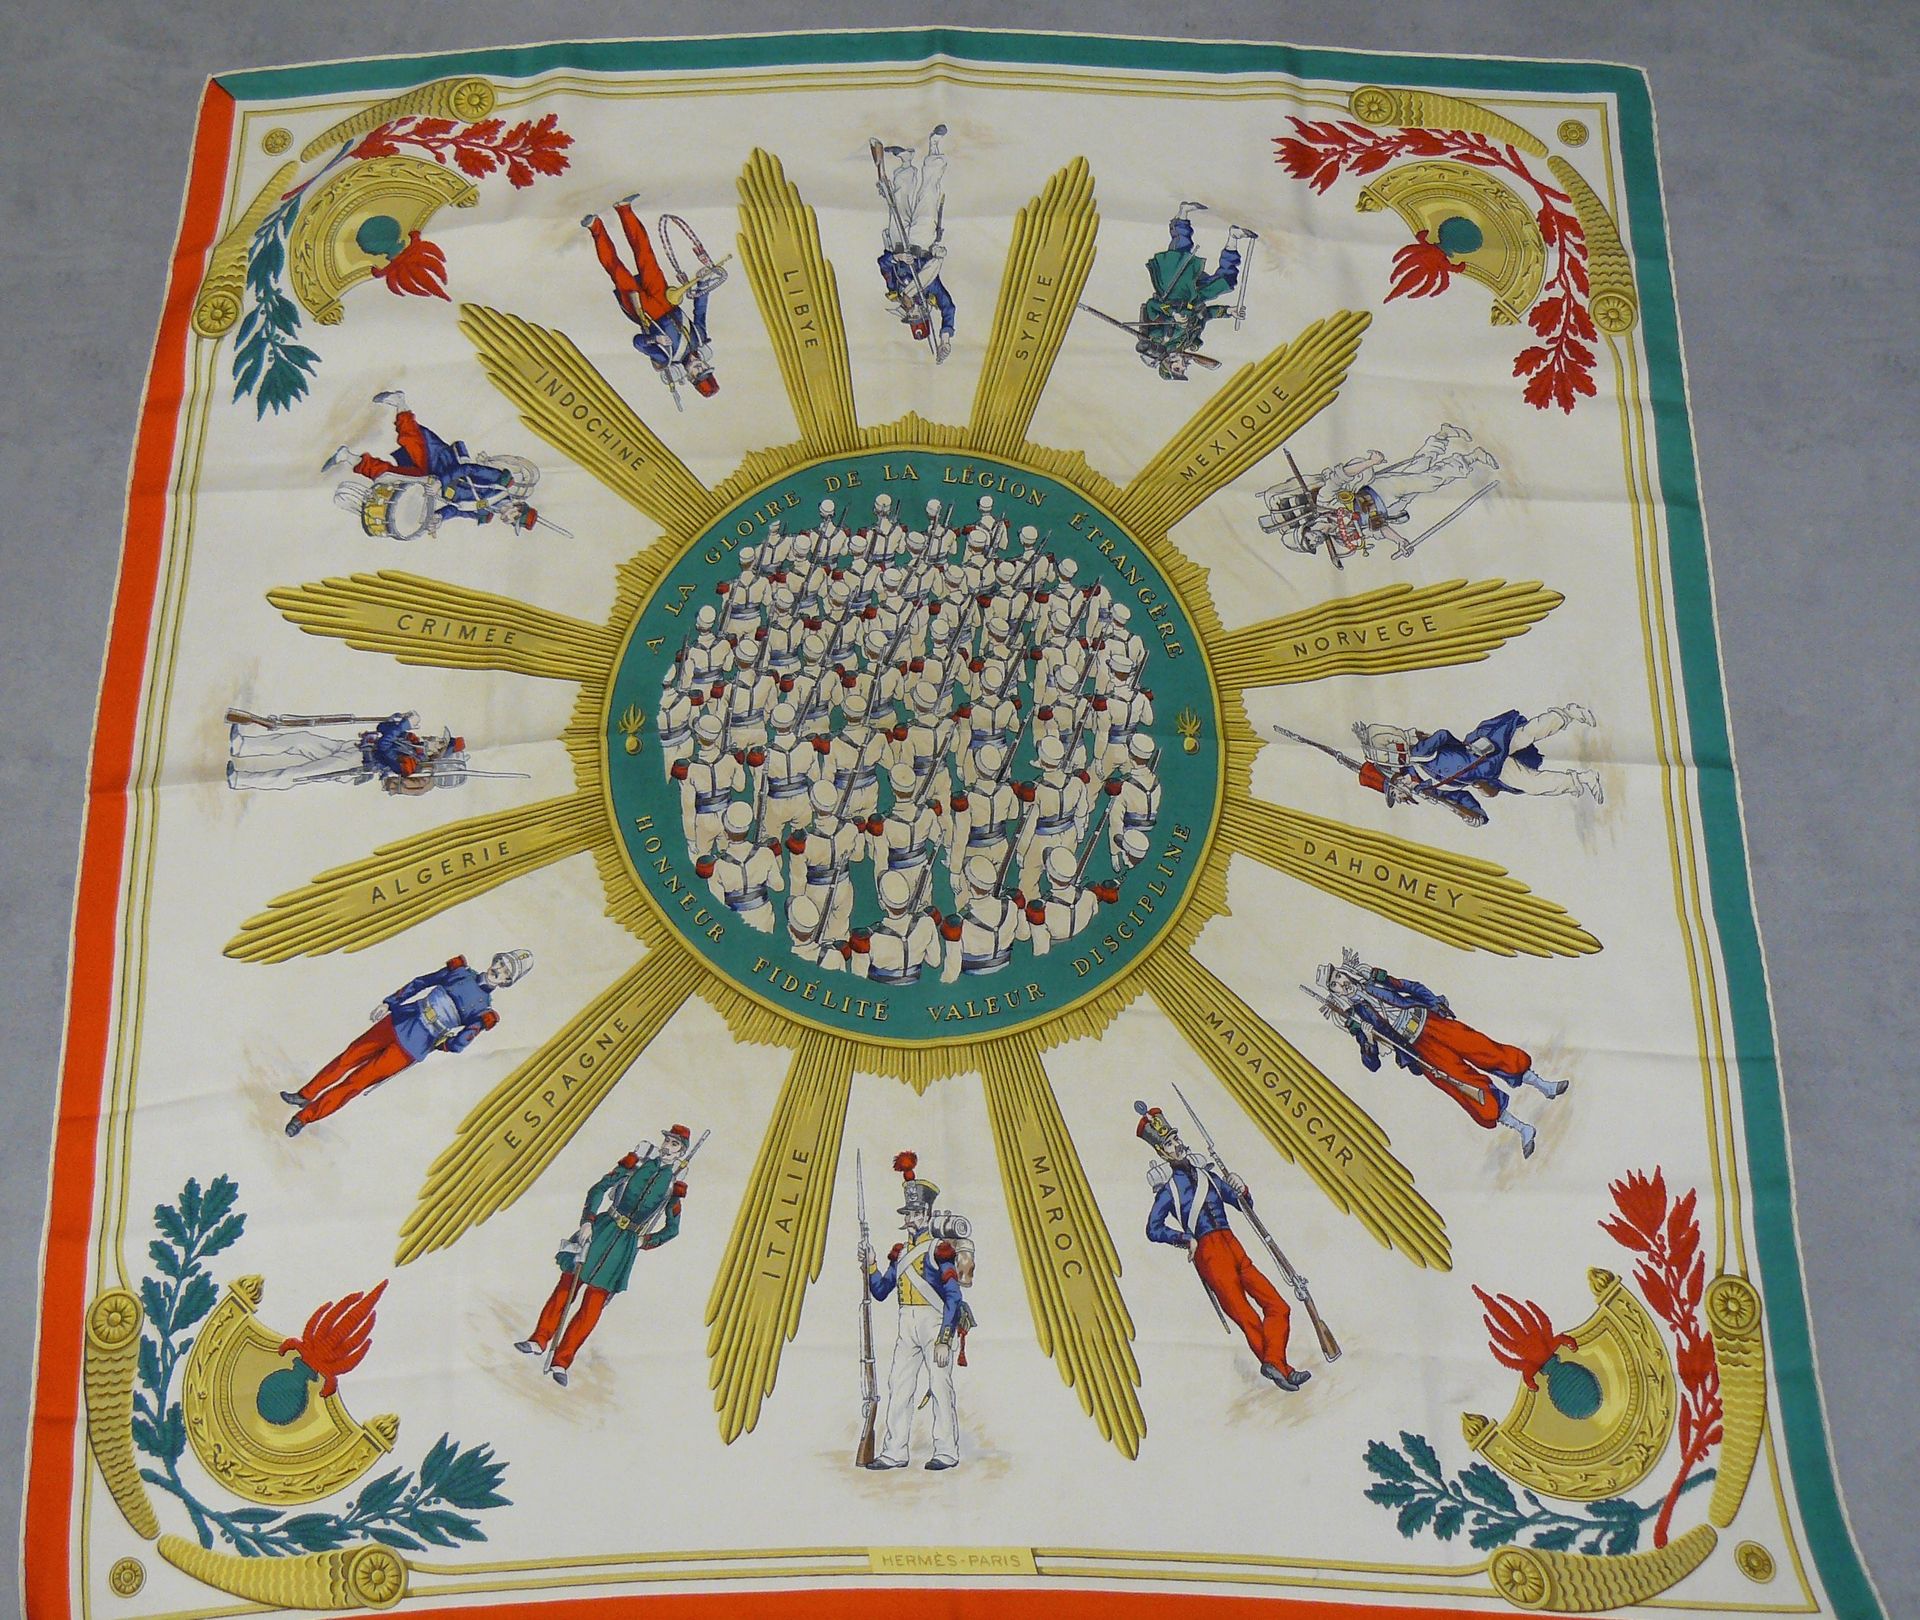 HERMES HERMES Paris, a silk scarf "To the glory of the Foreign Legion" - (countr&hellip;